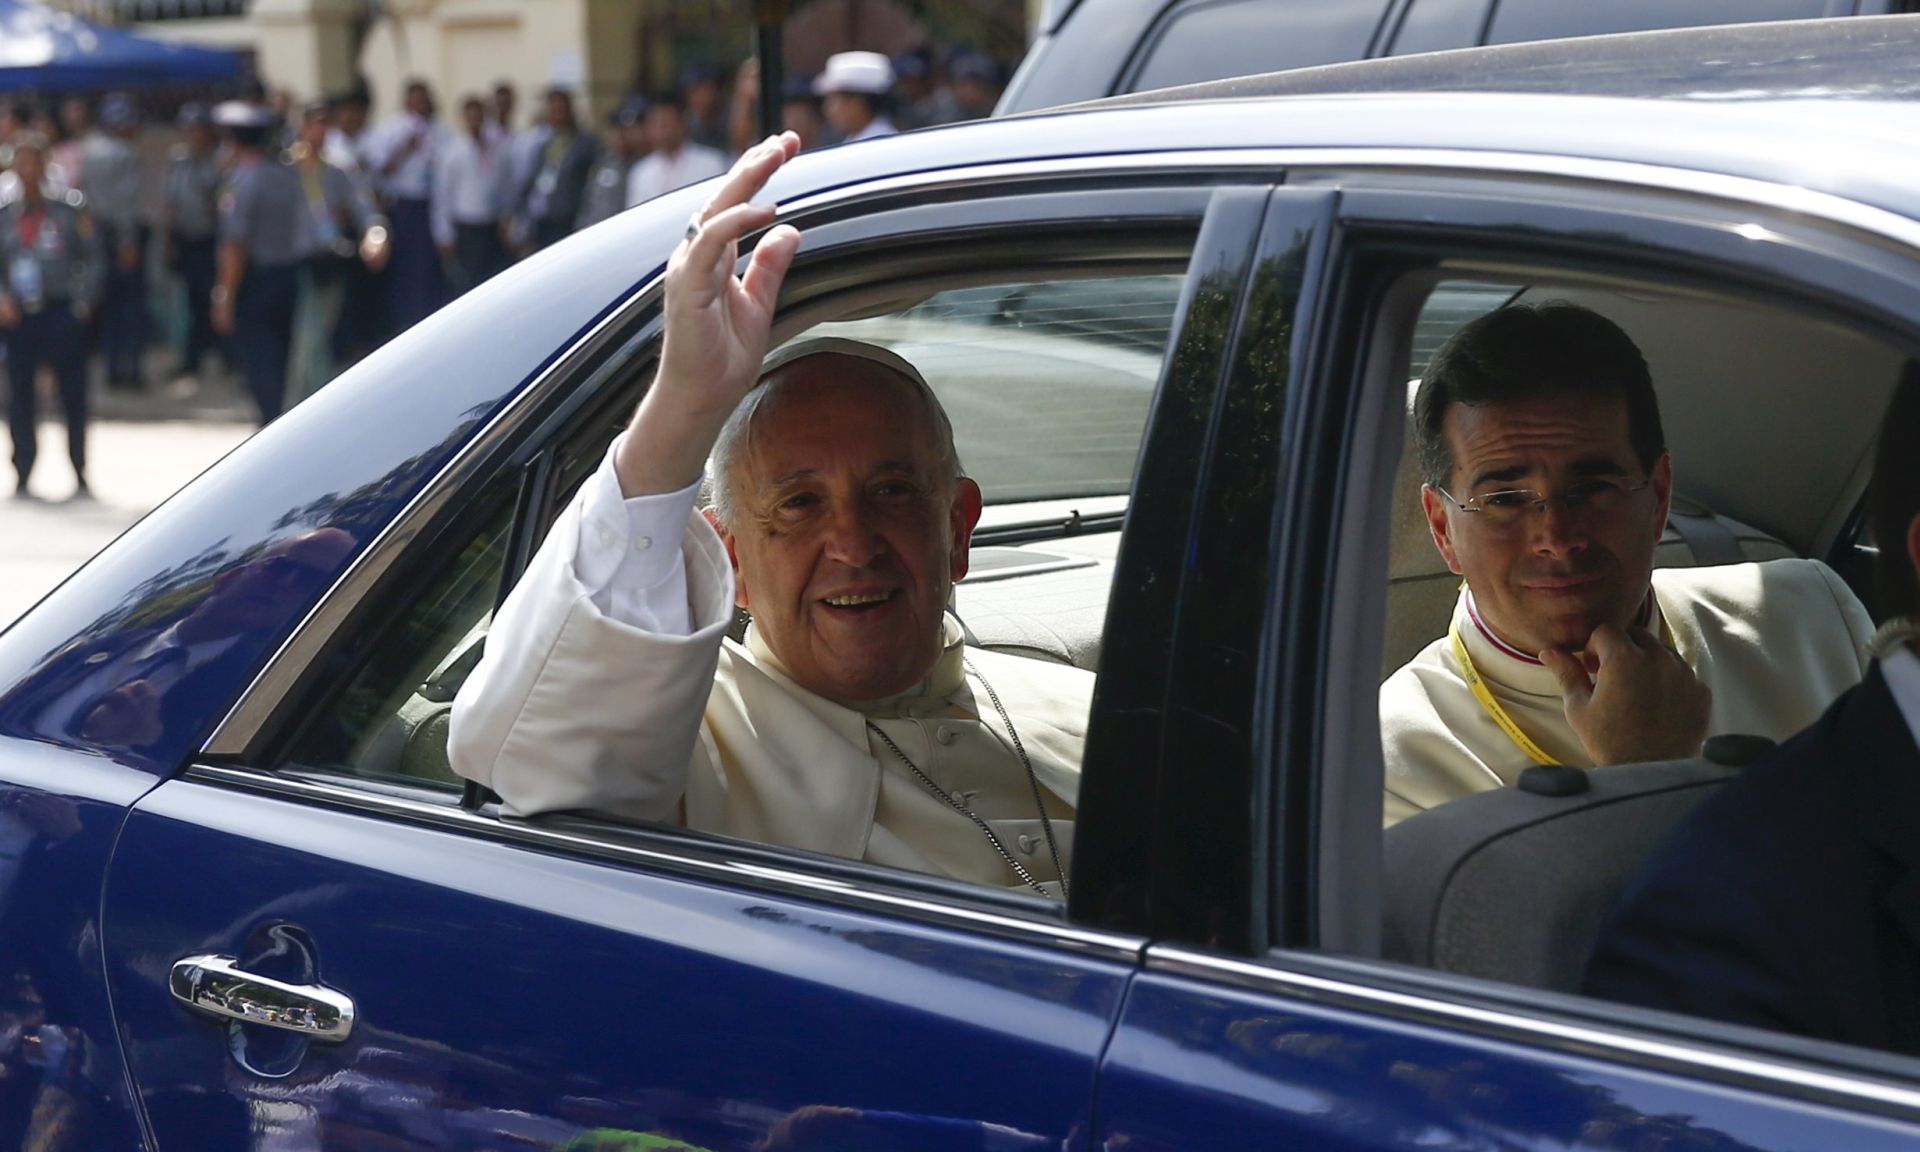 epa06354831 Pope Francis (L) waves from the vehicle as he leaves Archbishop's house to depart capital Naypyitaw, Yangon, Myanmar, 28 November 2017. Pope Francis' visit in Myanmar and Bangladesh runs from 27 November to 02 December 2017.  EPA/LYNN BO BO